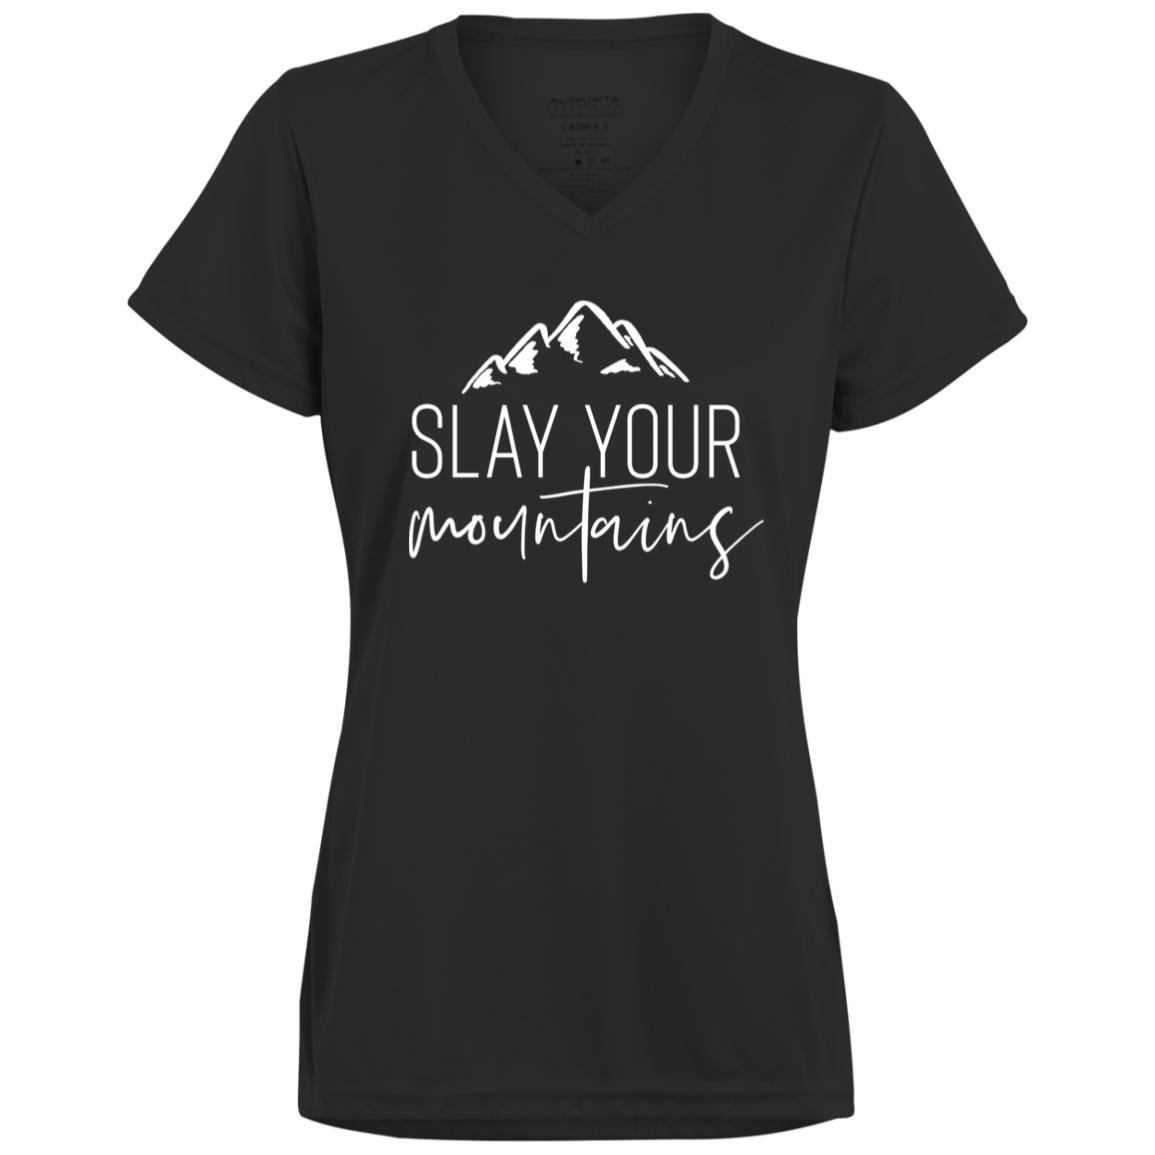 Slay Your Mountains - Moisture Wicking T-Shirts/Hoodies